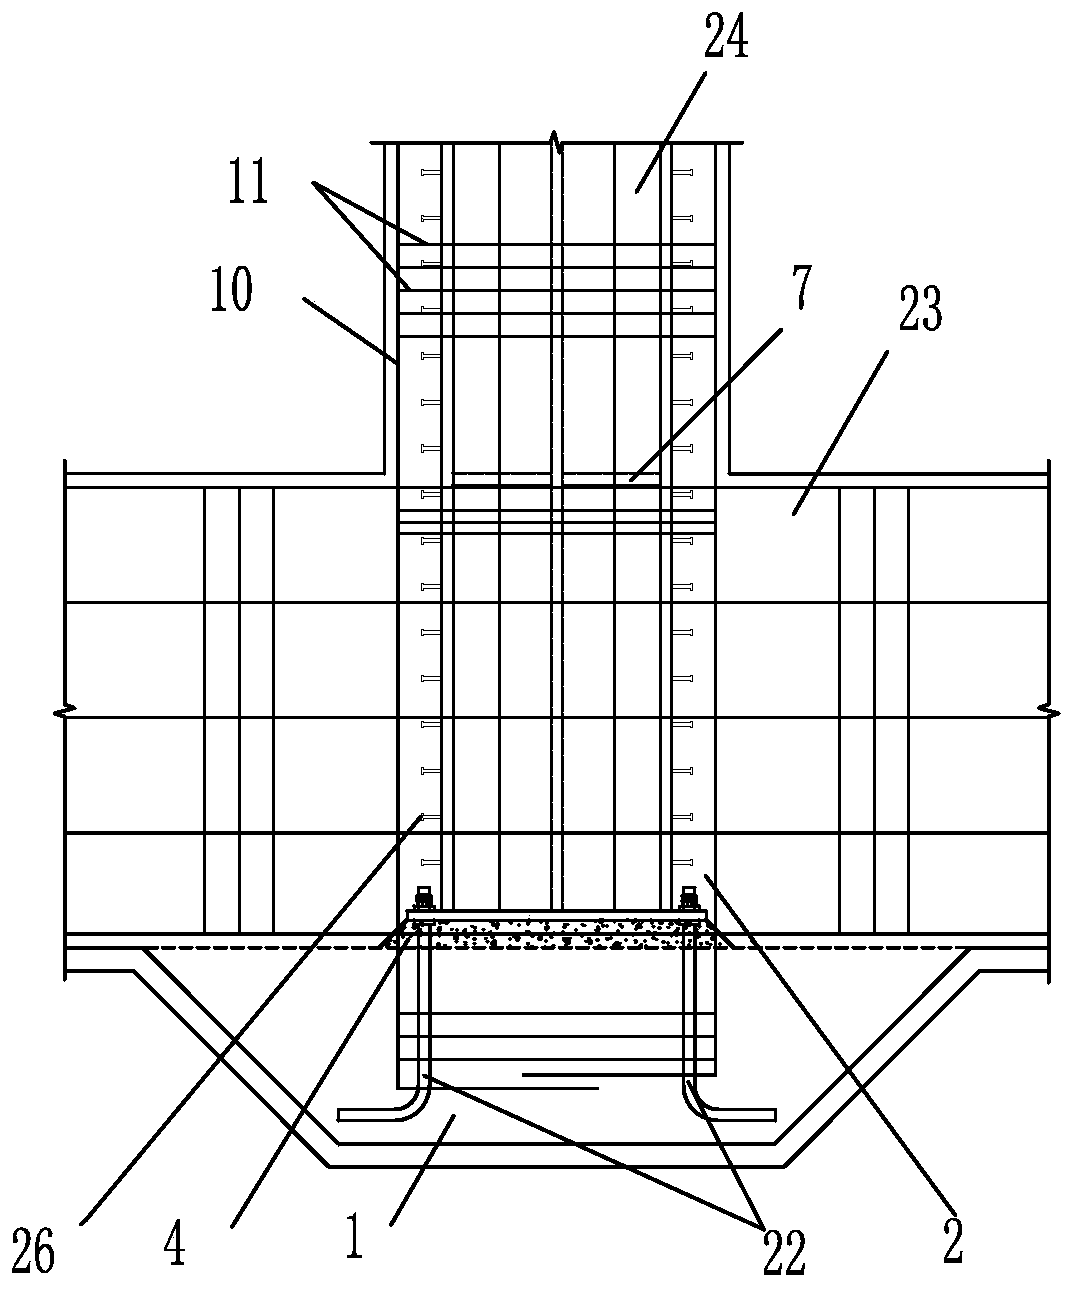 External-stretching-beam buried column base construction for reducing height of bearing table and construction method